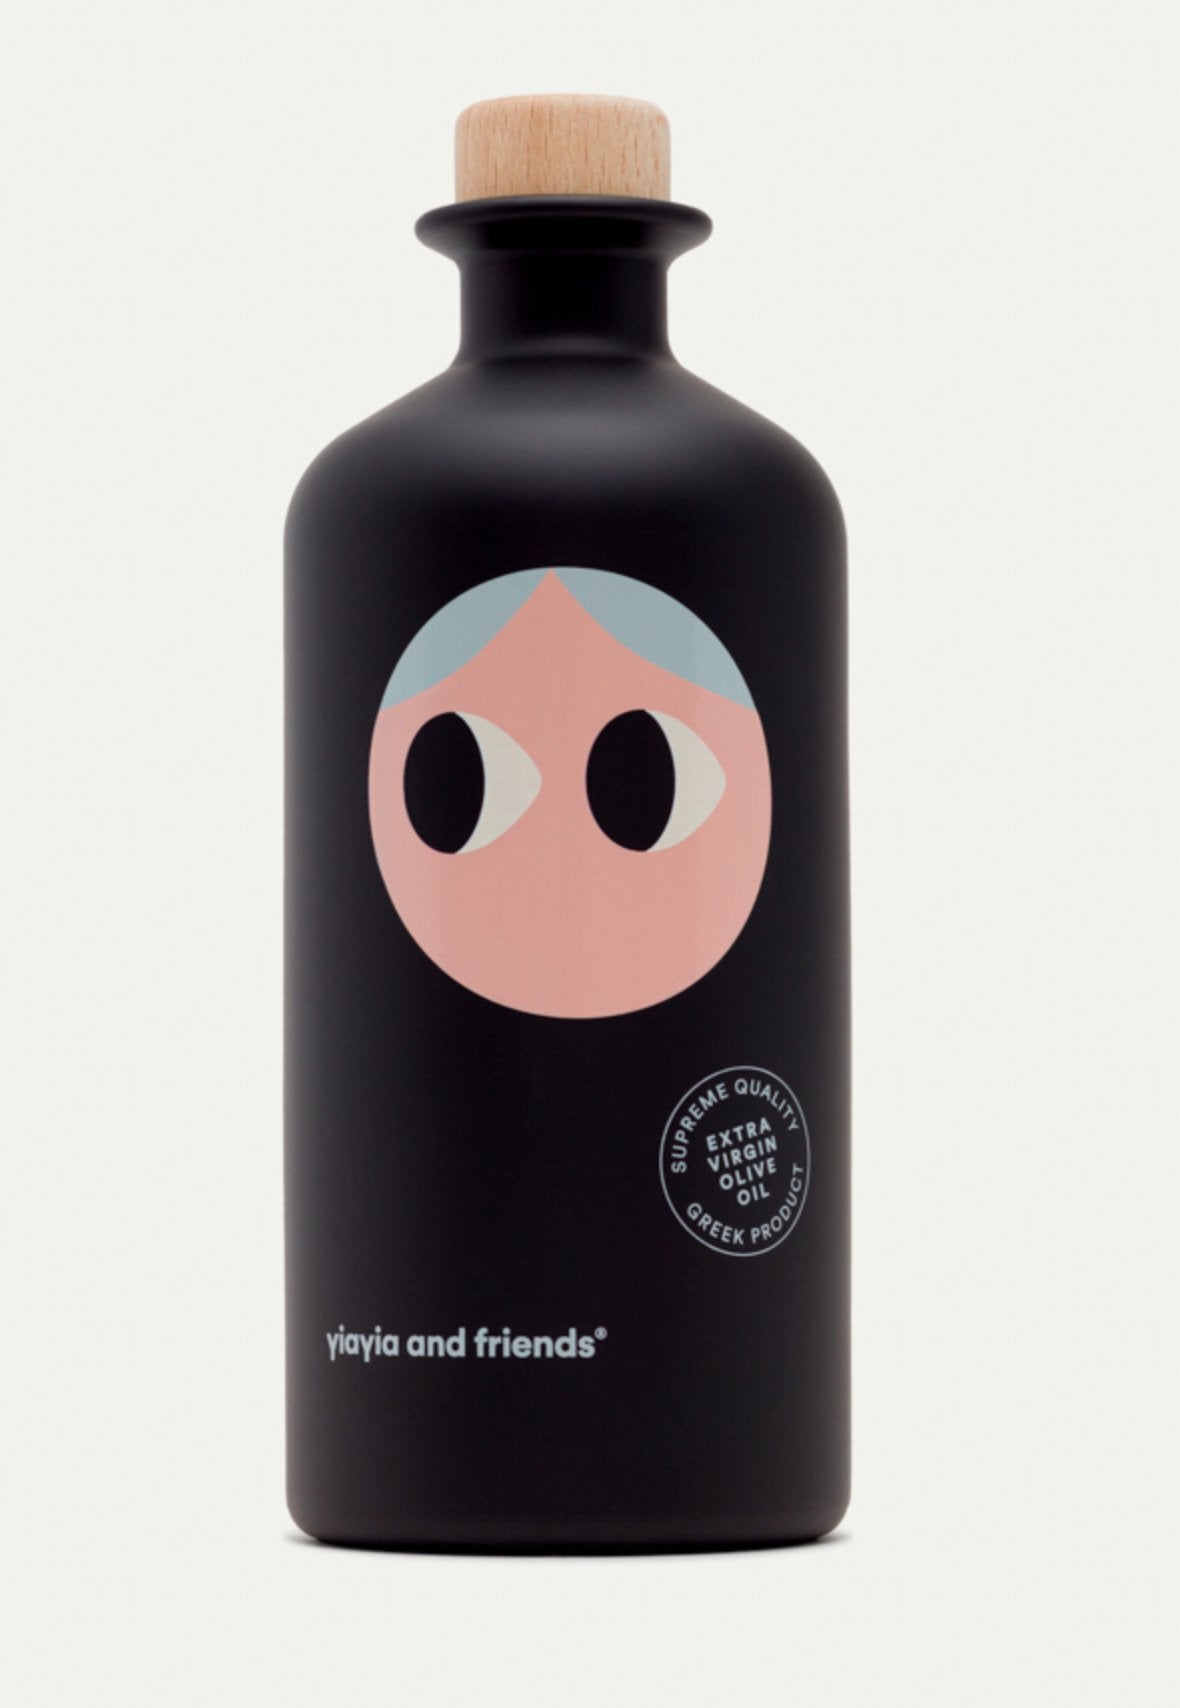 YIAYIA AND FRIENDS Extra Virgin Olive Oil 500ml - Preston ApothecaryYIAYIA AND FRIENDS